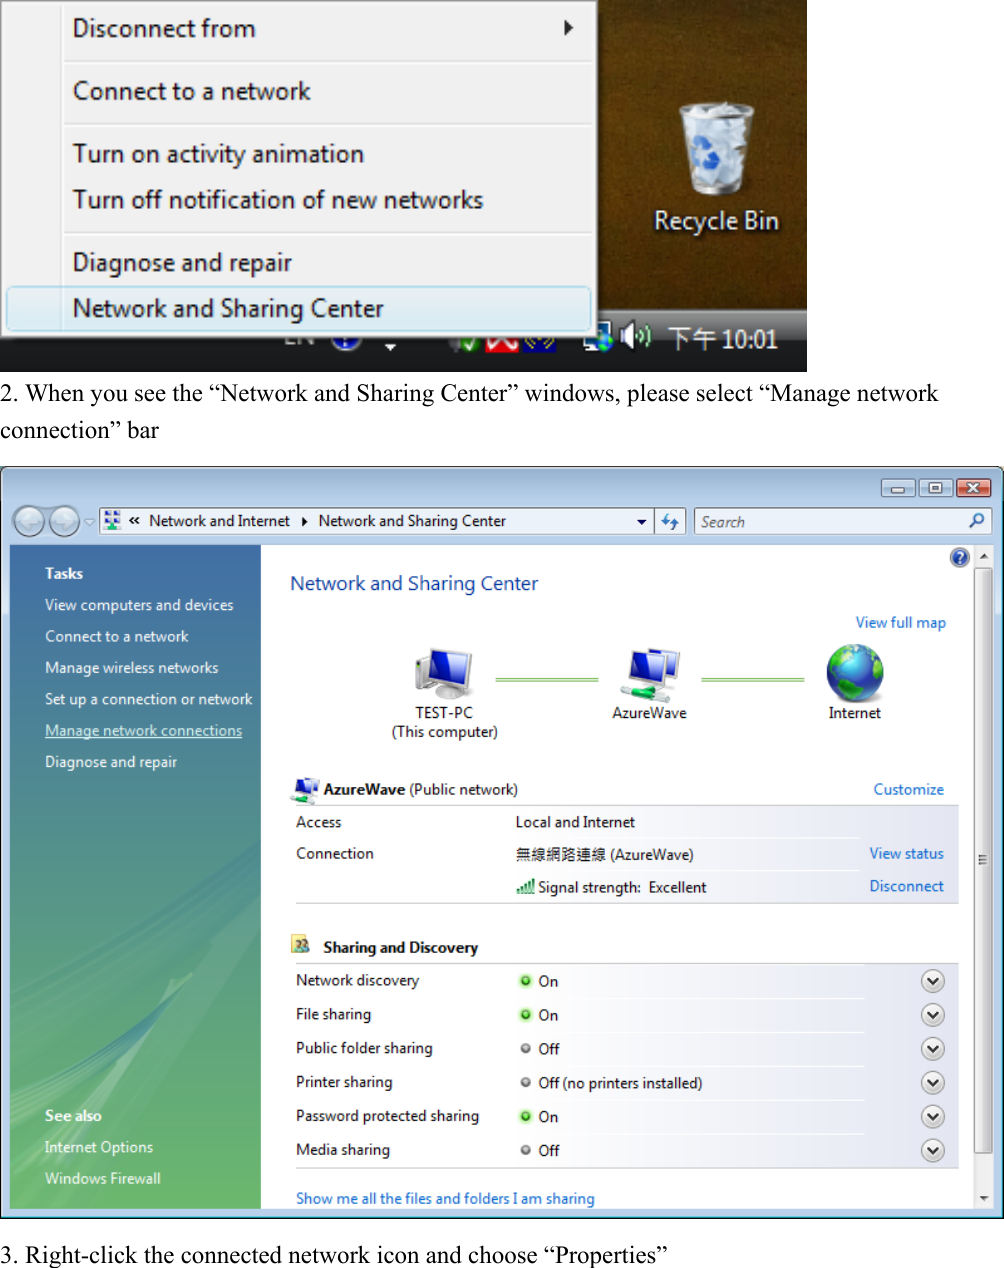  2. When you see the “Network and Sharing Center” windows, please select “Manage network connection” bar  3. Right-click the connected network icon and choose “Properties” 